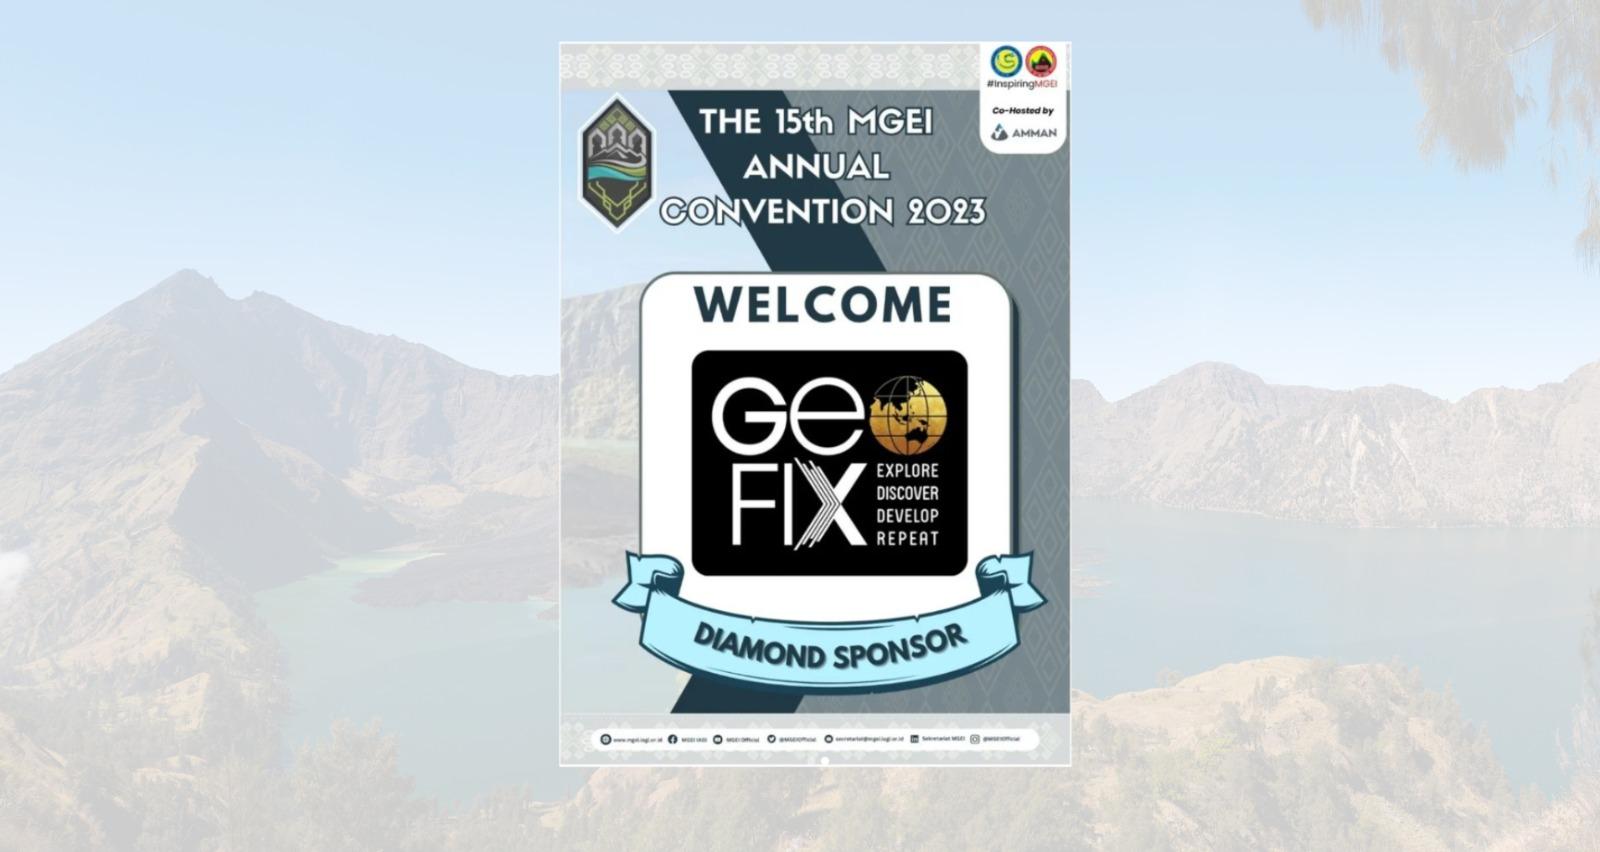 PT Geo Fix Indonesia takes great pride in participating in the esteemed 15th MGEI Annual Convention 2023, an inspiring event for professionals in the geological and mining sectors in Indonesia. We were honored to have distinguished figures at our booth, including Dr. Steve Garwin, B.Sc, M.Sc, PhD, FAusIMM, FAIG, FSEG, Mr. Muhammad Wafid as the Acting Head of the Geological Agency, and Mr. Azaria Indrawardhanan, the Policy Analyst Junior Expert from the Directorate General of Mineral and Coal. During the event, we had the opportunity to engage in friendly conversations and offer a cup of coffee as part of our hospitality.

This Annual Convention is not merely a moment in time; it represents a pivotal chapter that guides us toward collective growth amidst challenges and opportunities. PT Geo Fix remains steadfast in its commitment to shaping a brighter, more sustainable future for Indonesia's economic geology and mining industry. Our participation in the MGEI Annual Convention for the past three years reflects our dedication to contribute to the advancement and development of the geological and mining sectors in Indonesia.